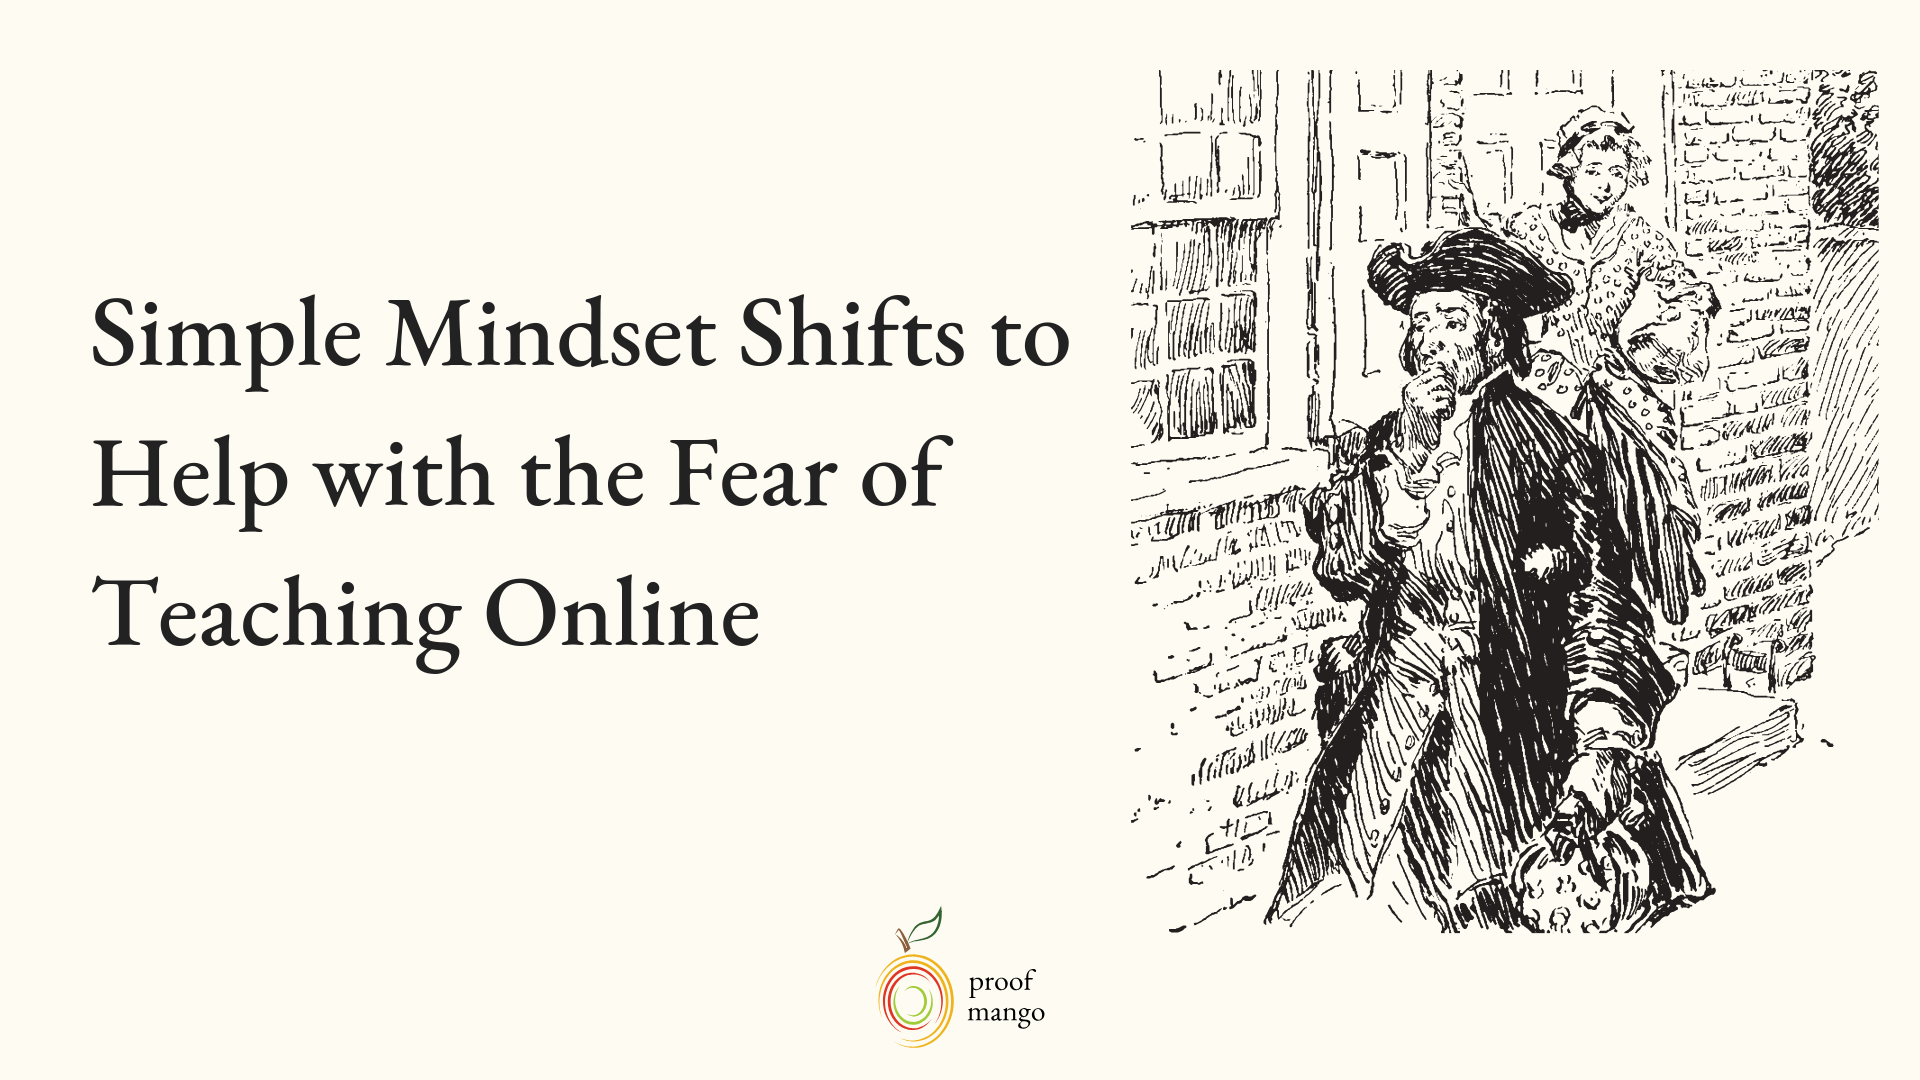 Simple Mindset Shifts to Help with the Fear of Teaching Online